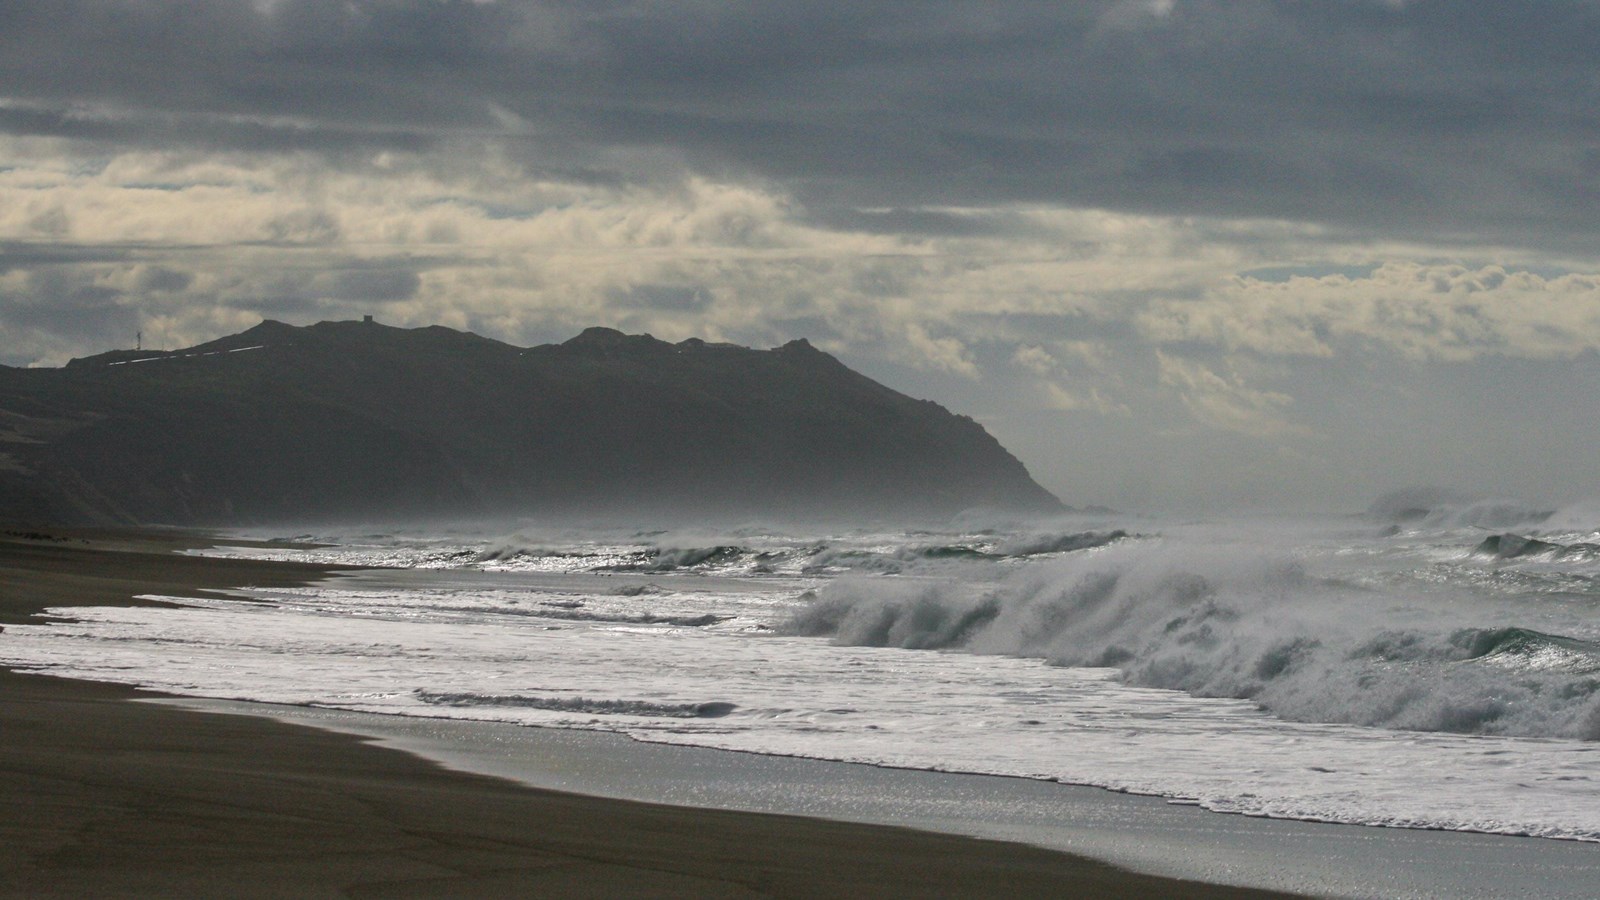 Large waves crash onto a sandy beach on a mostly cloudy day. Rocky headlands rise in the background.